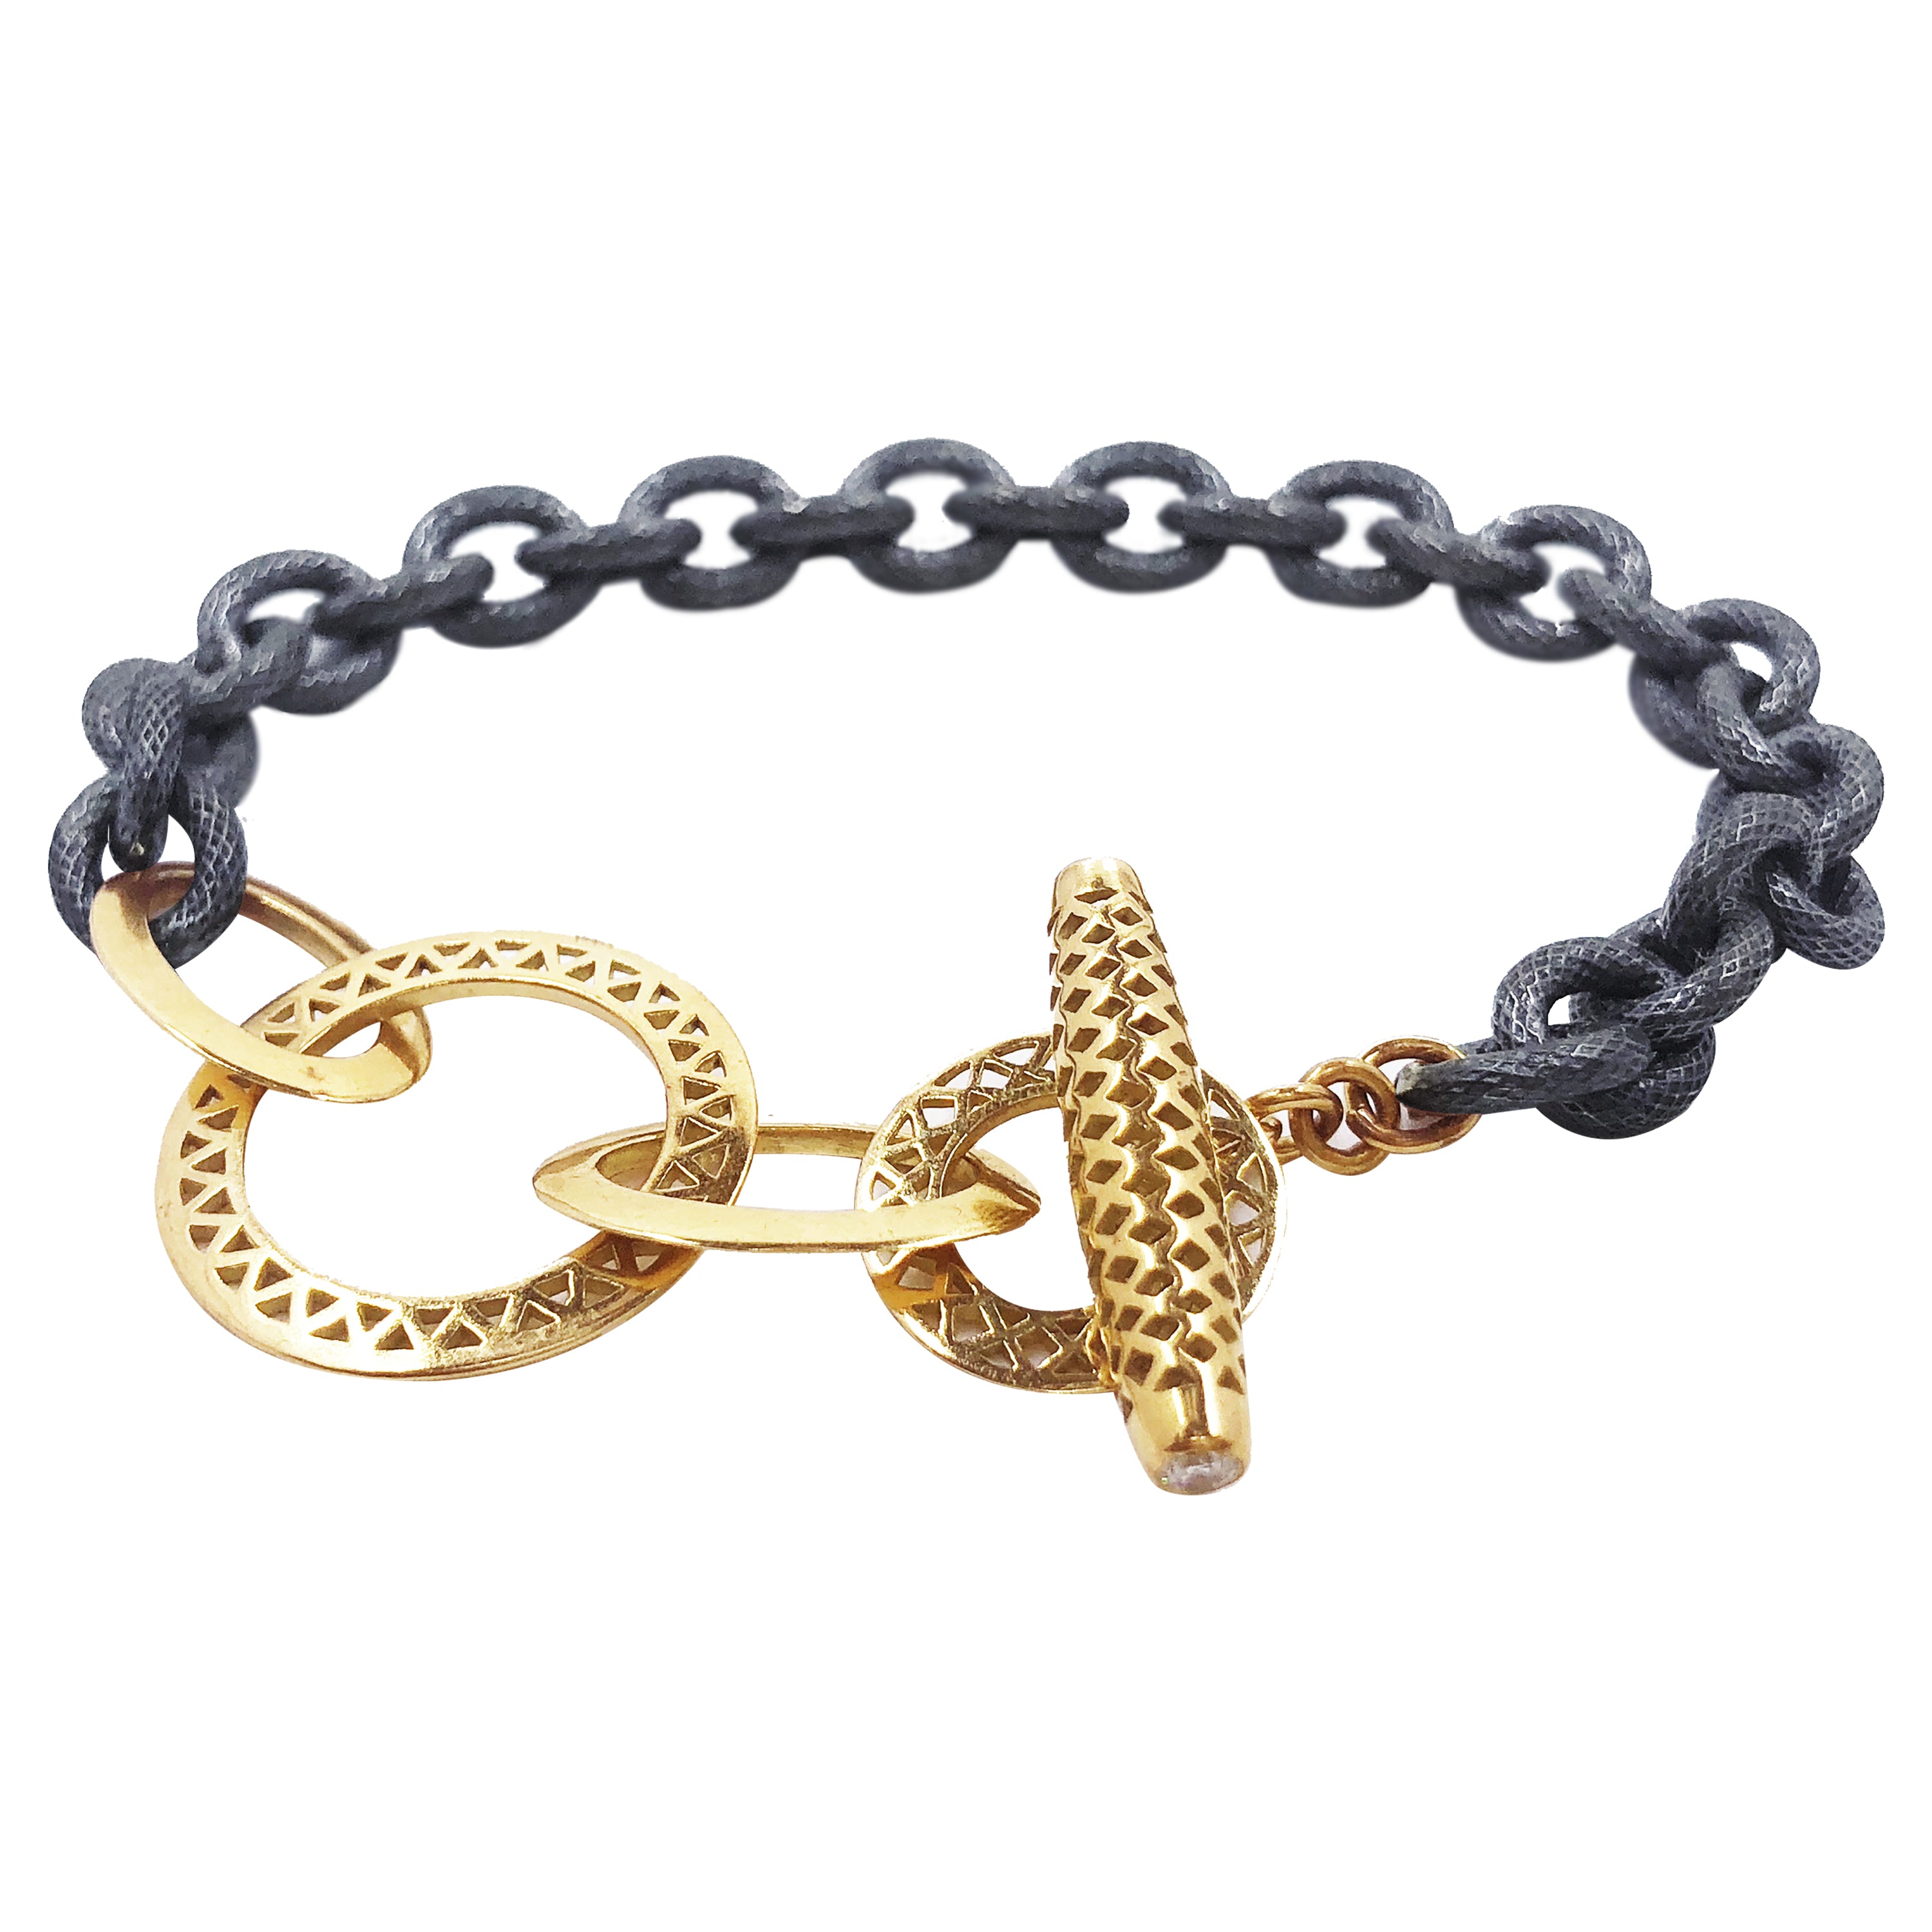 Crownwork® Link and Oxidized Silver Chain Bracelet